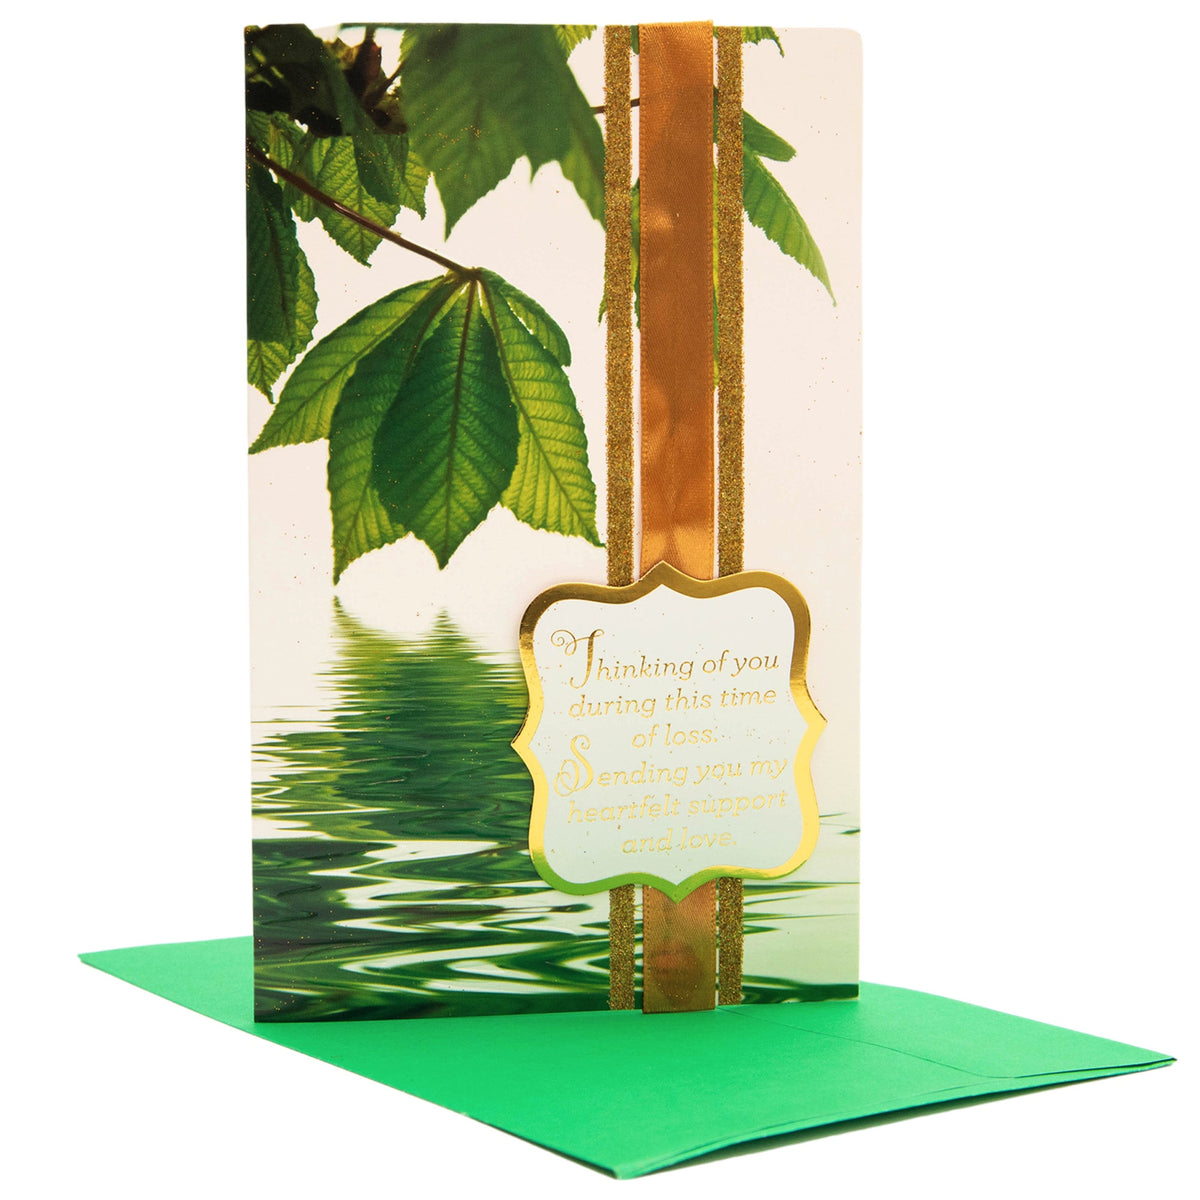 PaperCraft Handmade Sympathy Card – 3D Nature Scene With Glitter